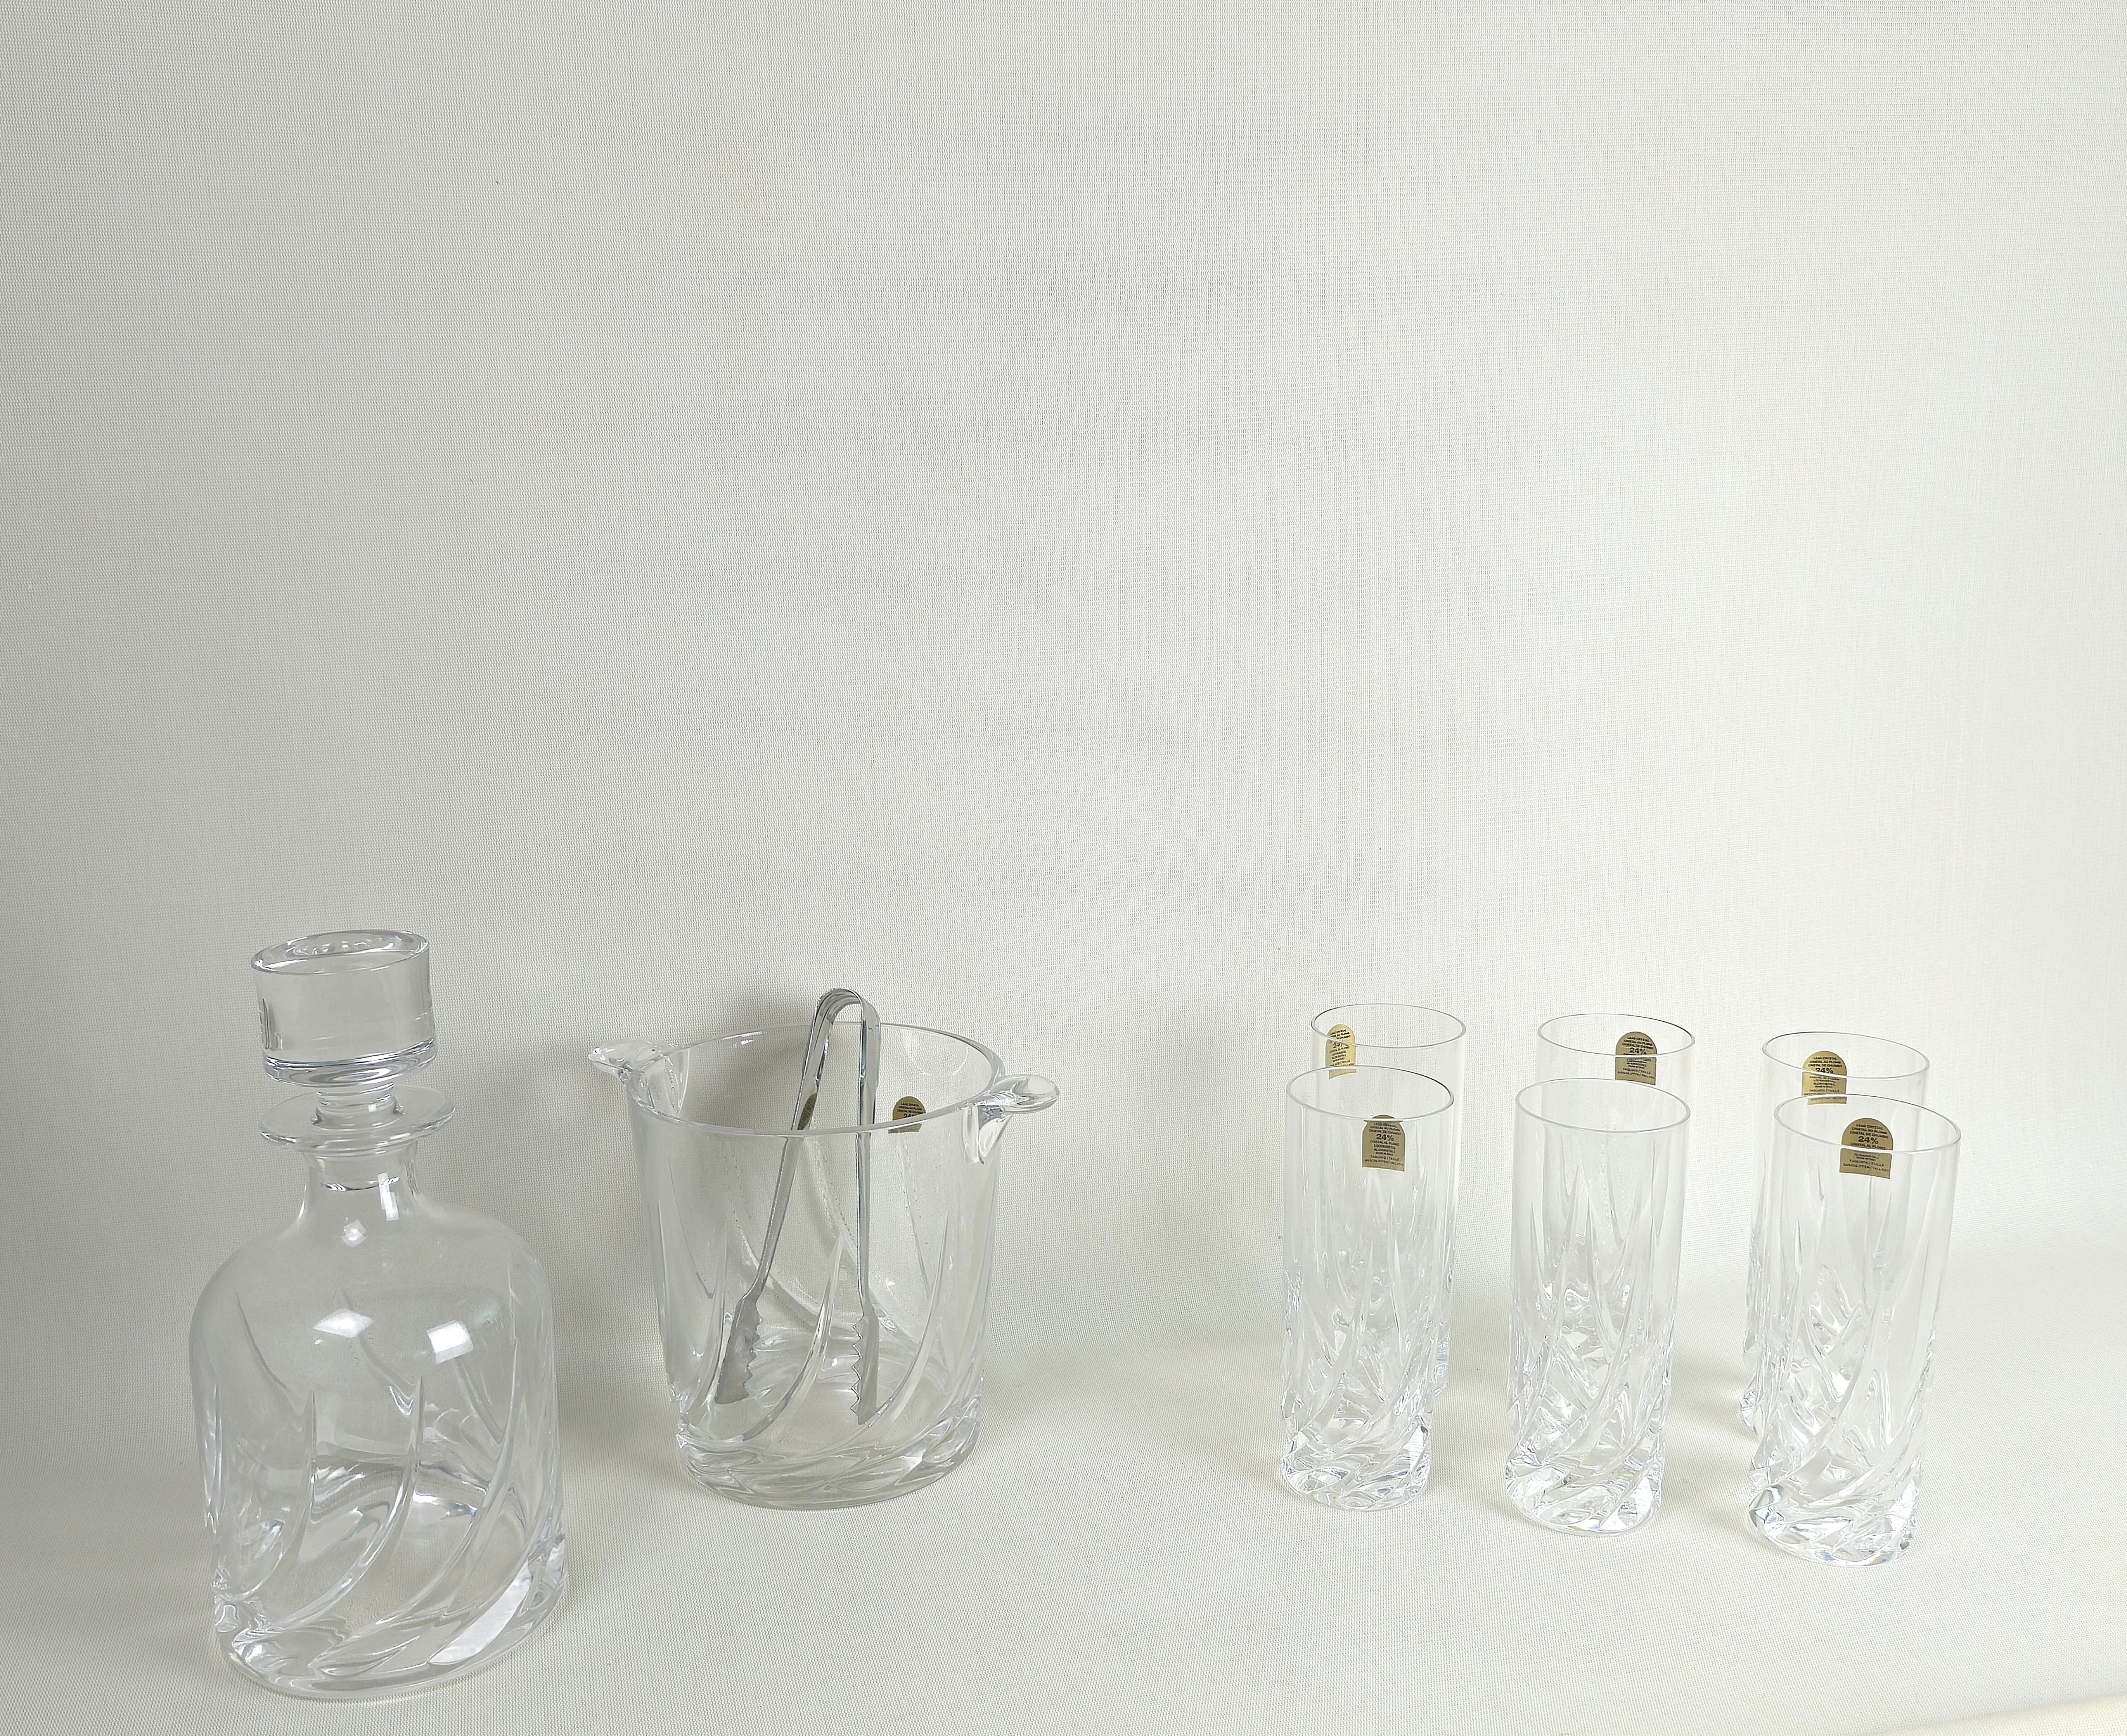 Crystal Serveware Glasses Bottle Ice Bucket Da Vinci Modern Italy 1990s Set of 8 In Good Condition For Sale In Palermo, IT